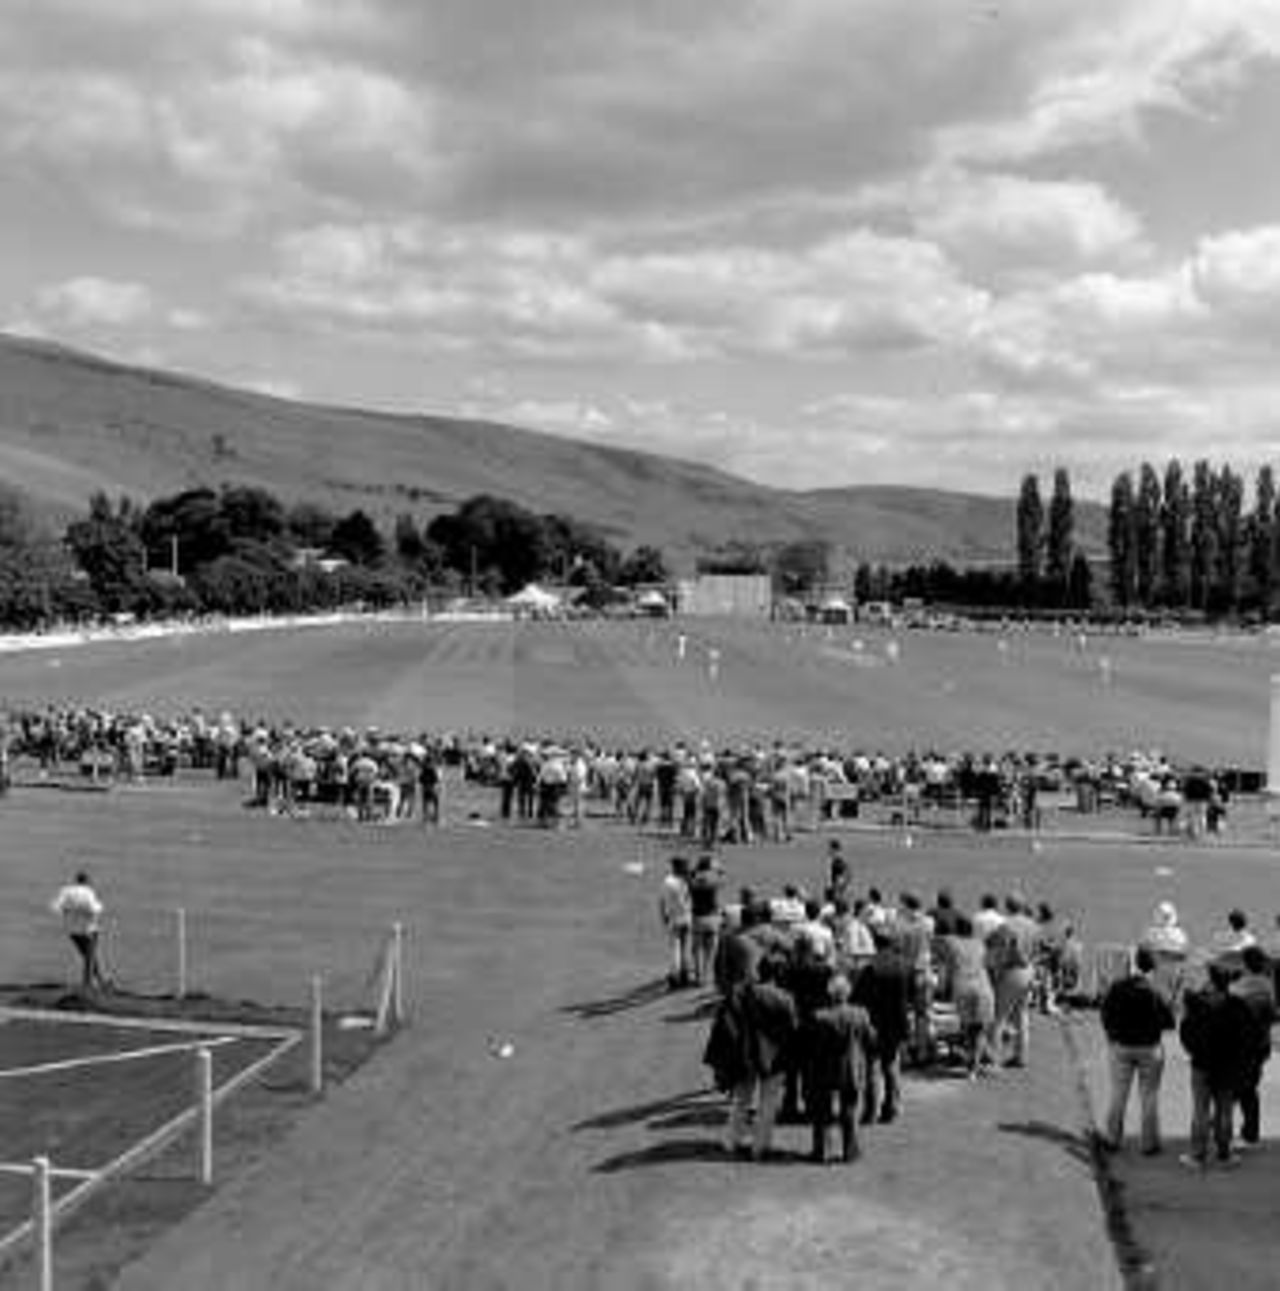 A view of the Hoover's Sports Ground, Merthyr Tydfil, Wales